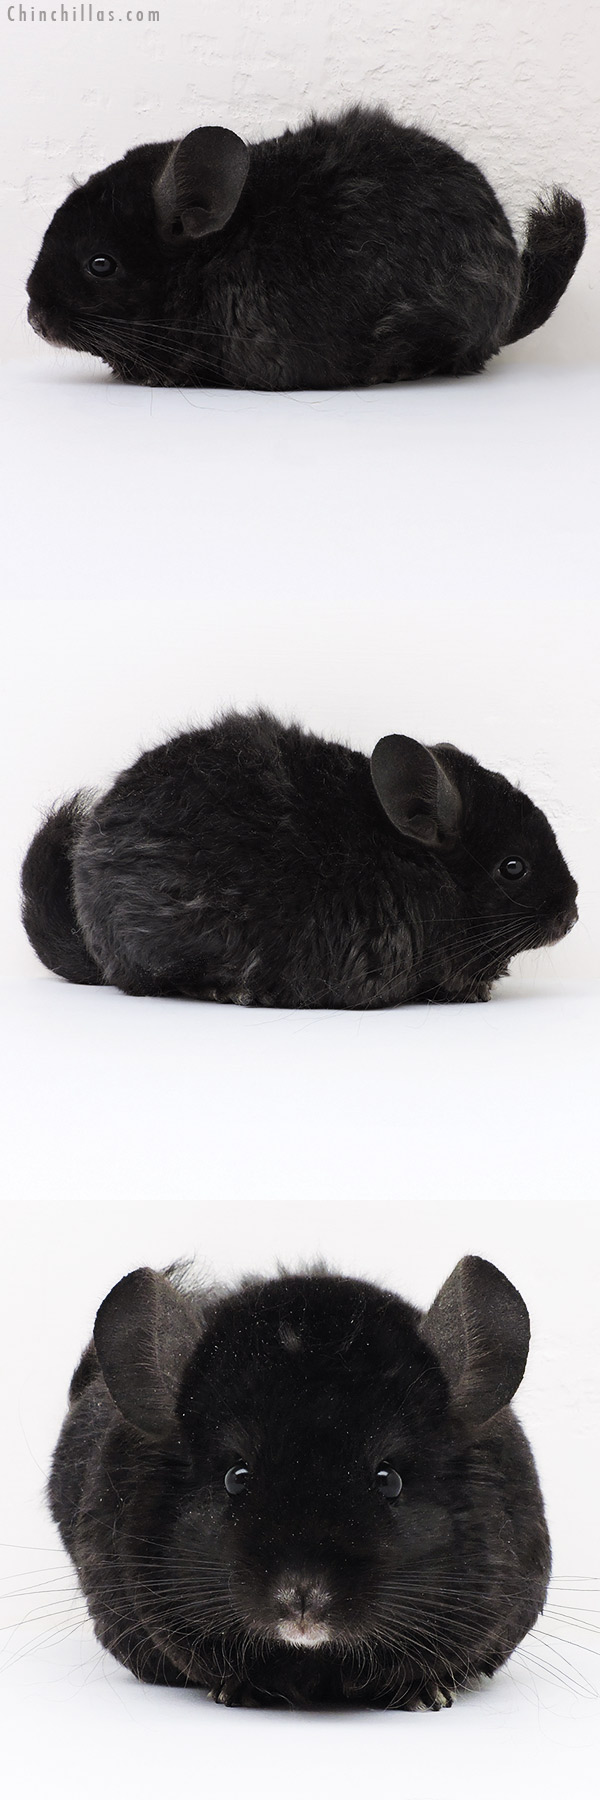 Chinchilla or related item offered for sale or export on Chinchillas.com - 16235 Exceptional Full Locken Female Chinchilla